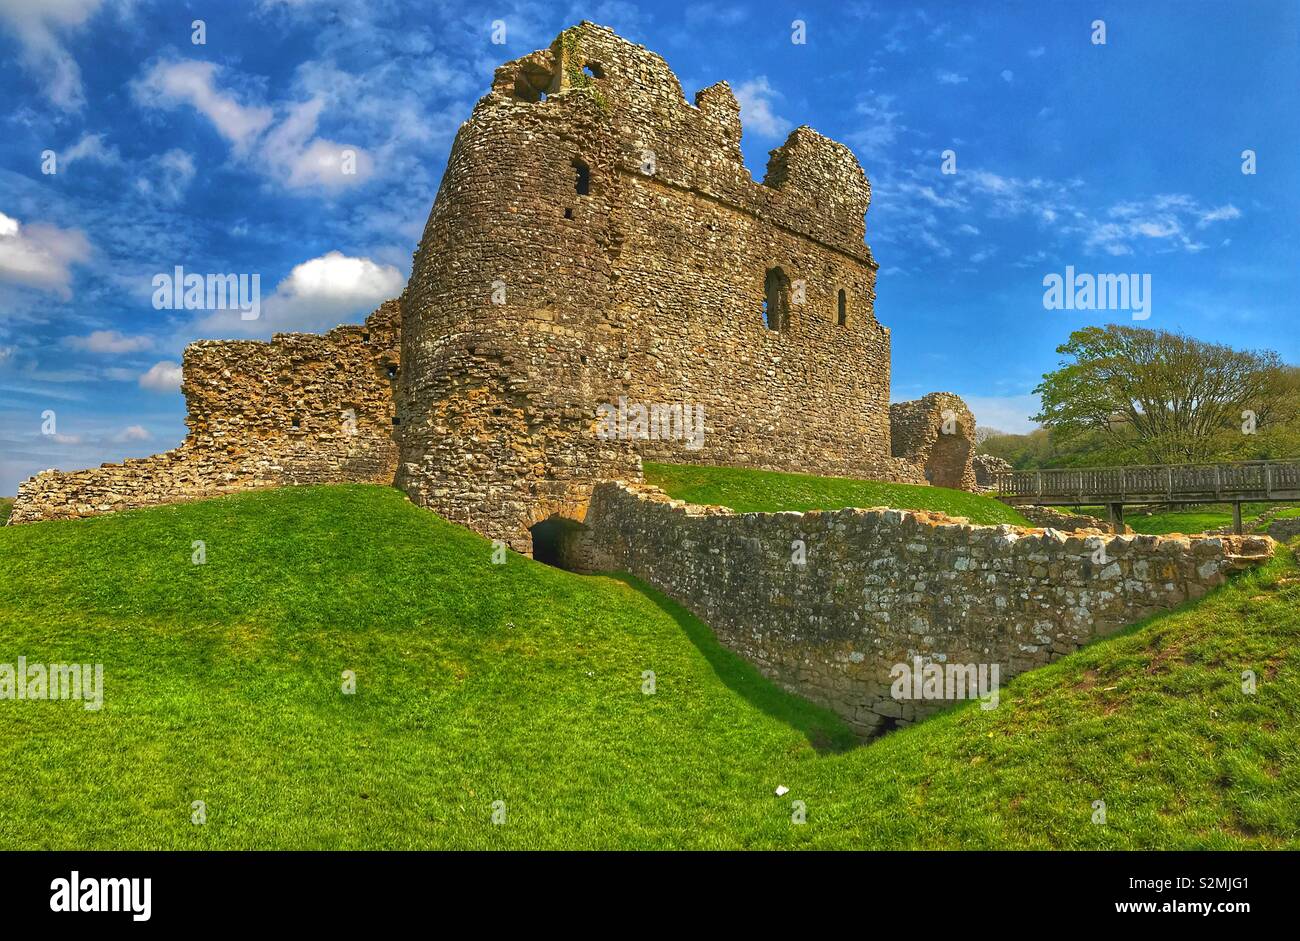 Ogmore Castle bear Bridgend in South Wales. It is a Grade I listed ruin of a Norman castle built early in the 12th Century. Stock Photo